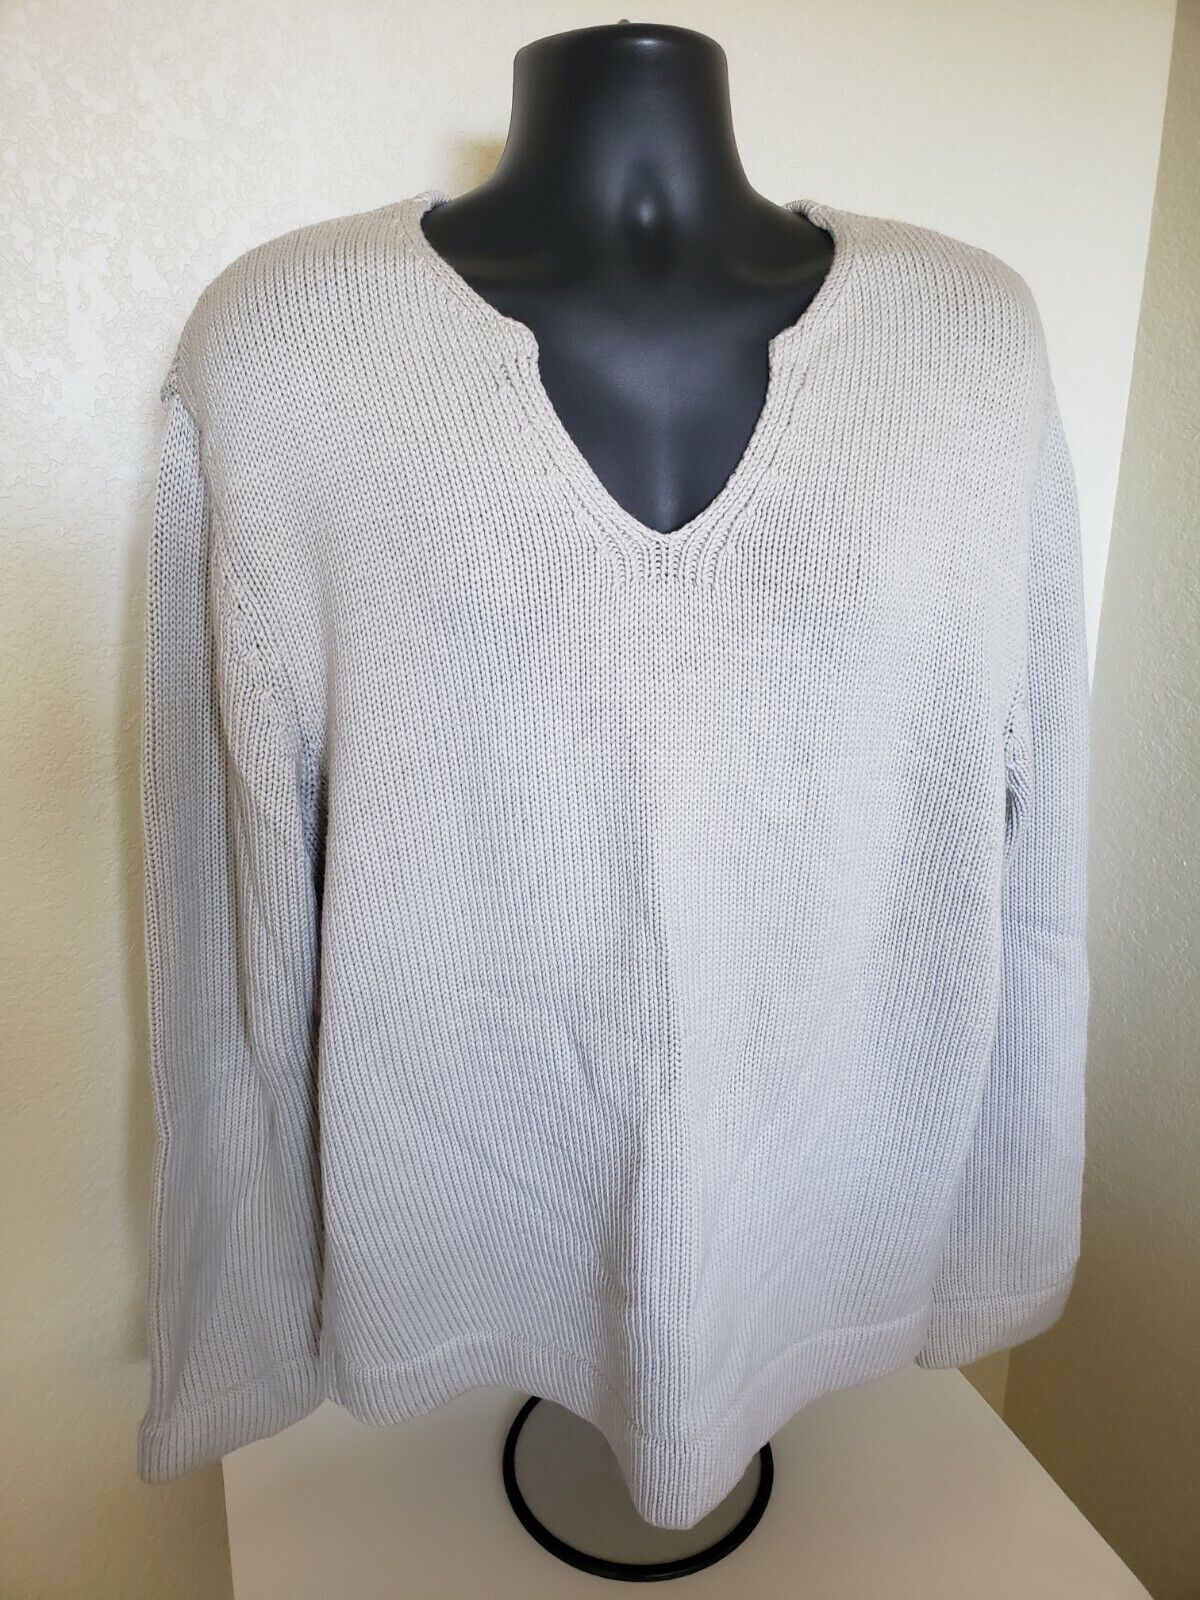 $450 Theory 100% Max 49% OFF High quality new Wool Sweater XL NWOT Heavy Size